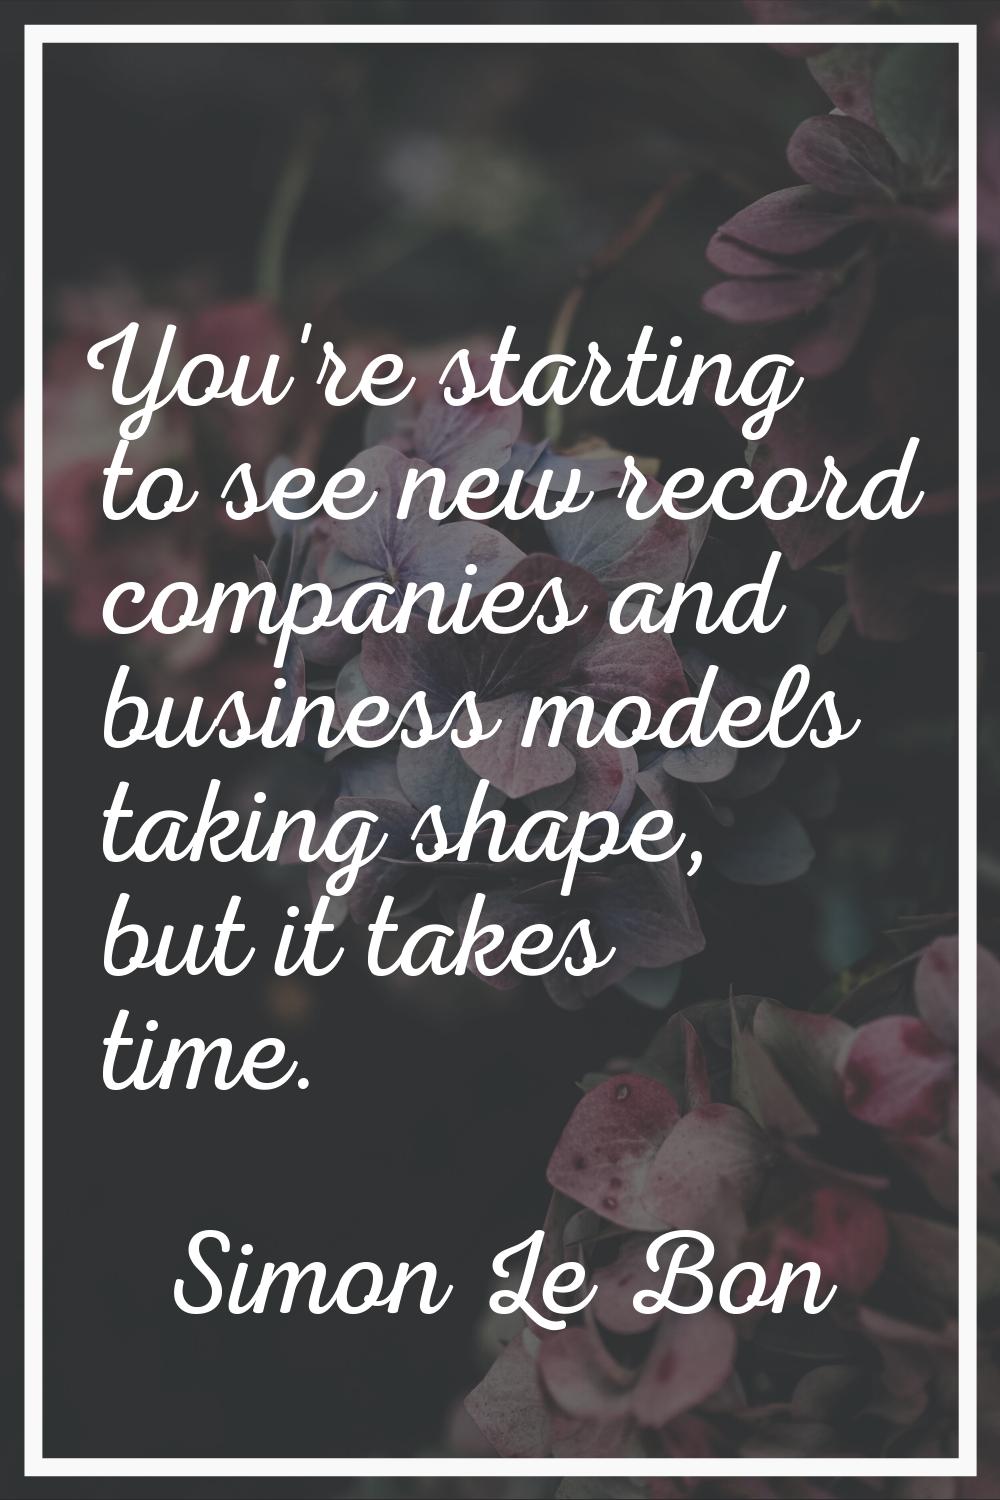 You're starting to see new record companies and business models taking shape, but it takes time.